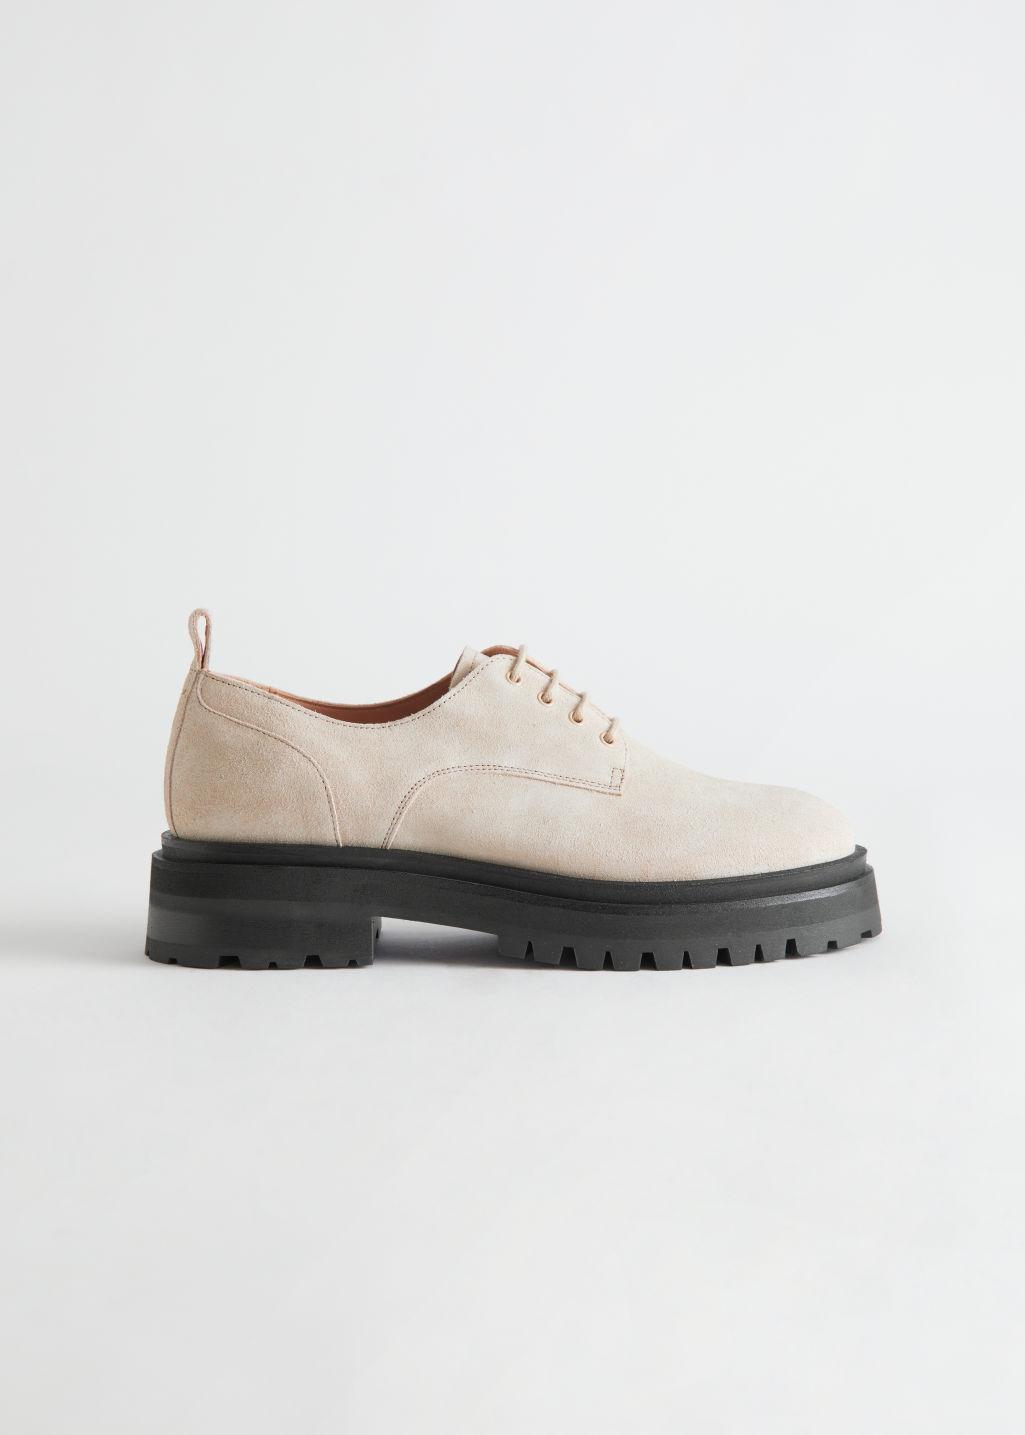 & Other Stories Chunky Suede Derby Shoes in Natural | Lyst